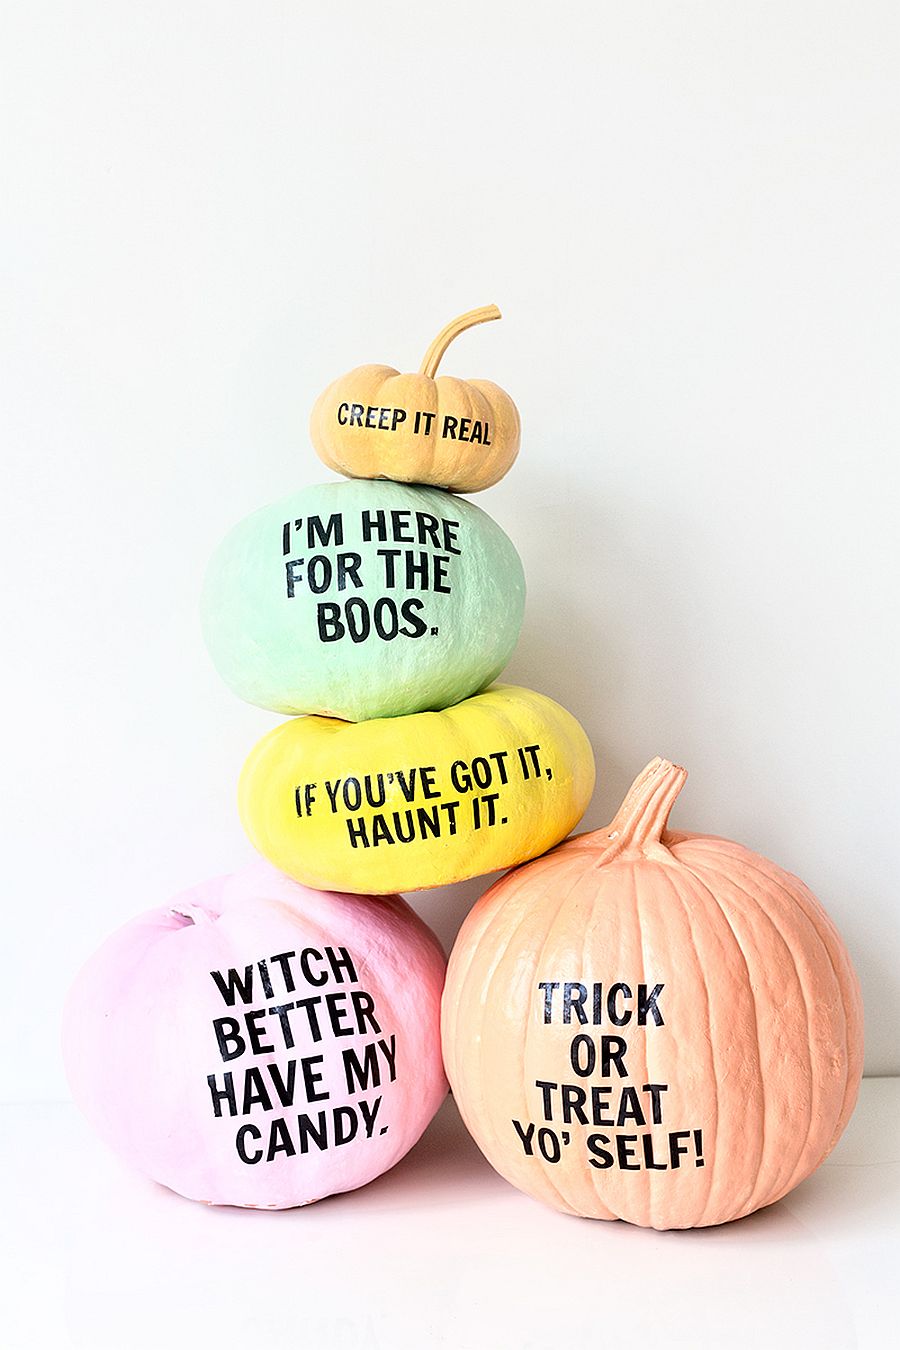 Greet your guests with cool messages using custom Pun-Kins